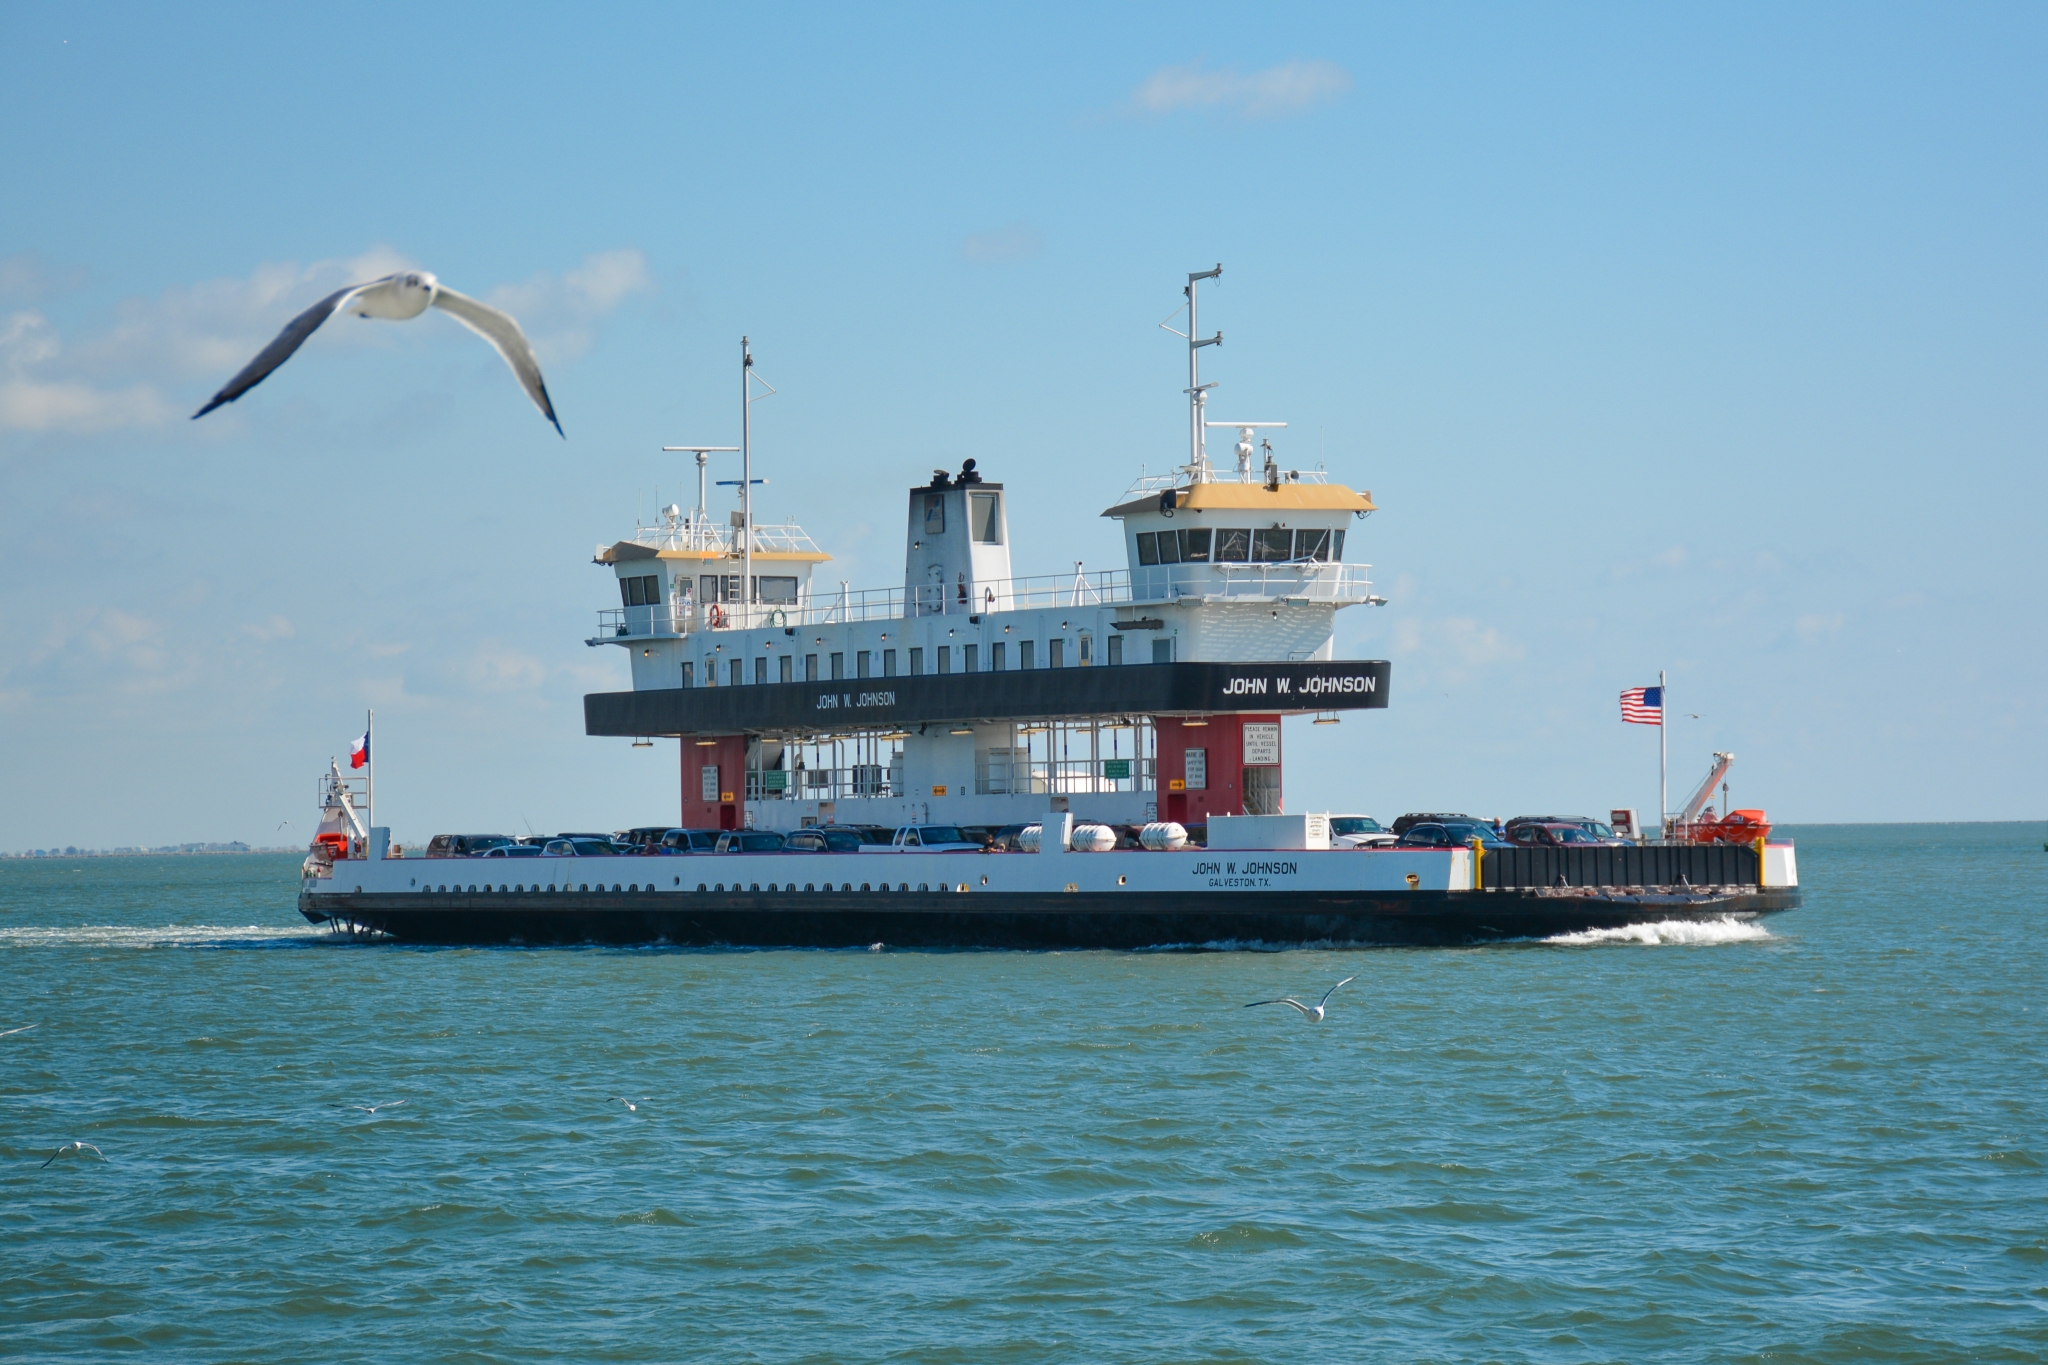 Update: Service resumes at Galveston Ferry after 'suspicious package' found